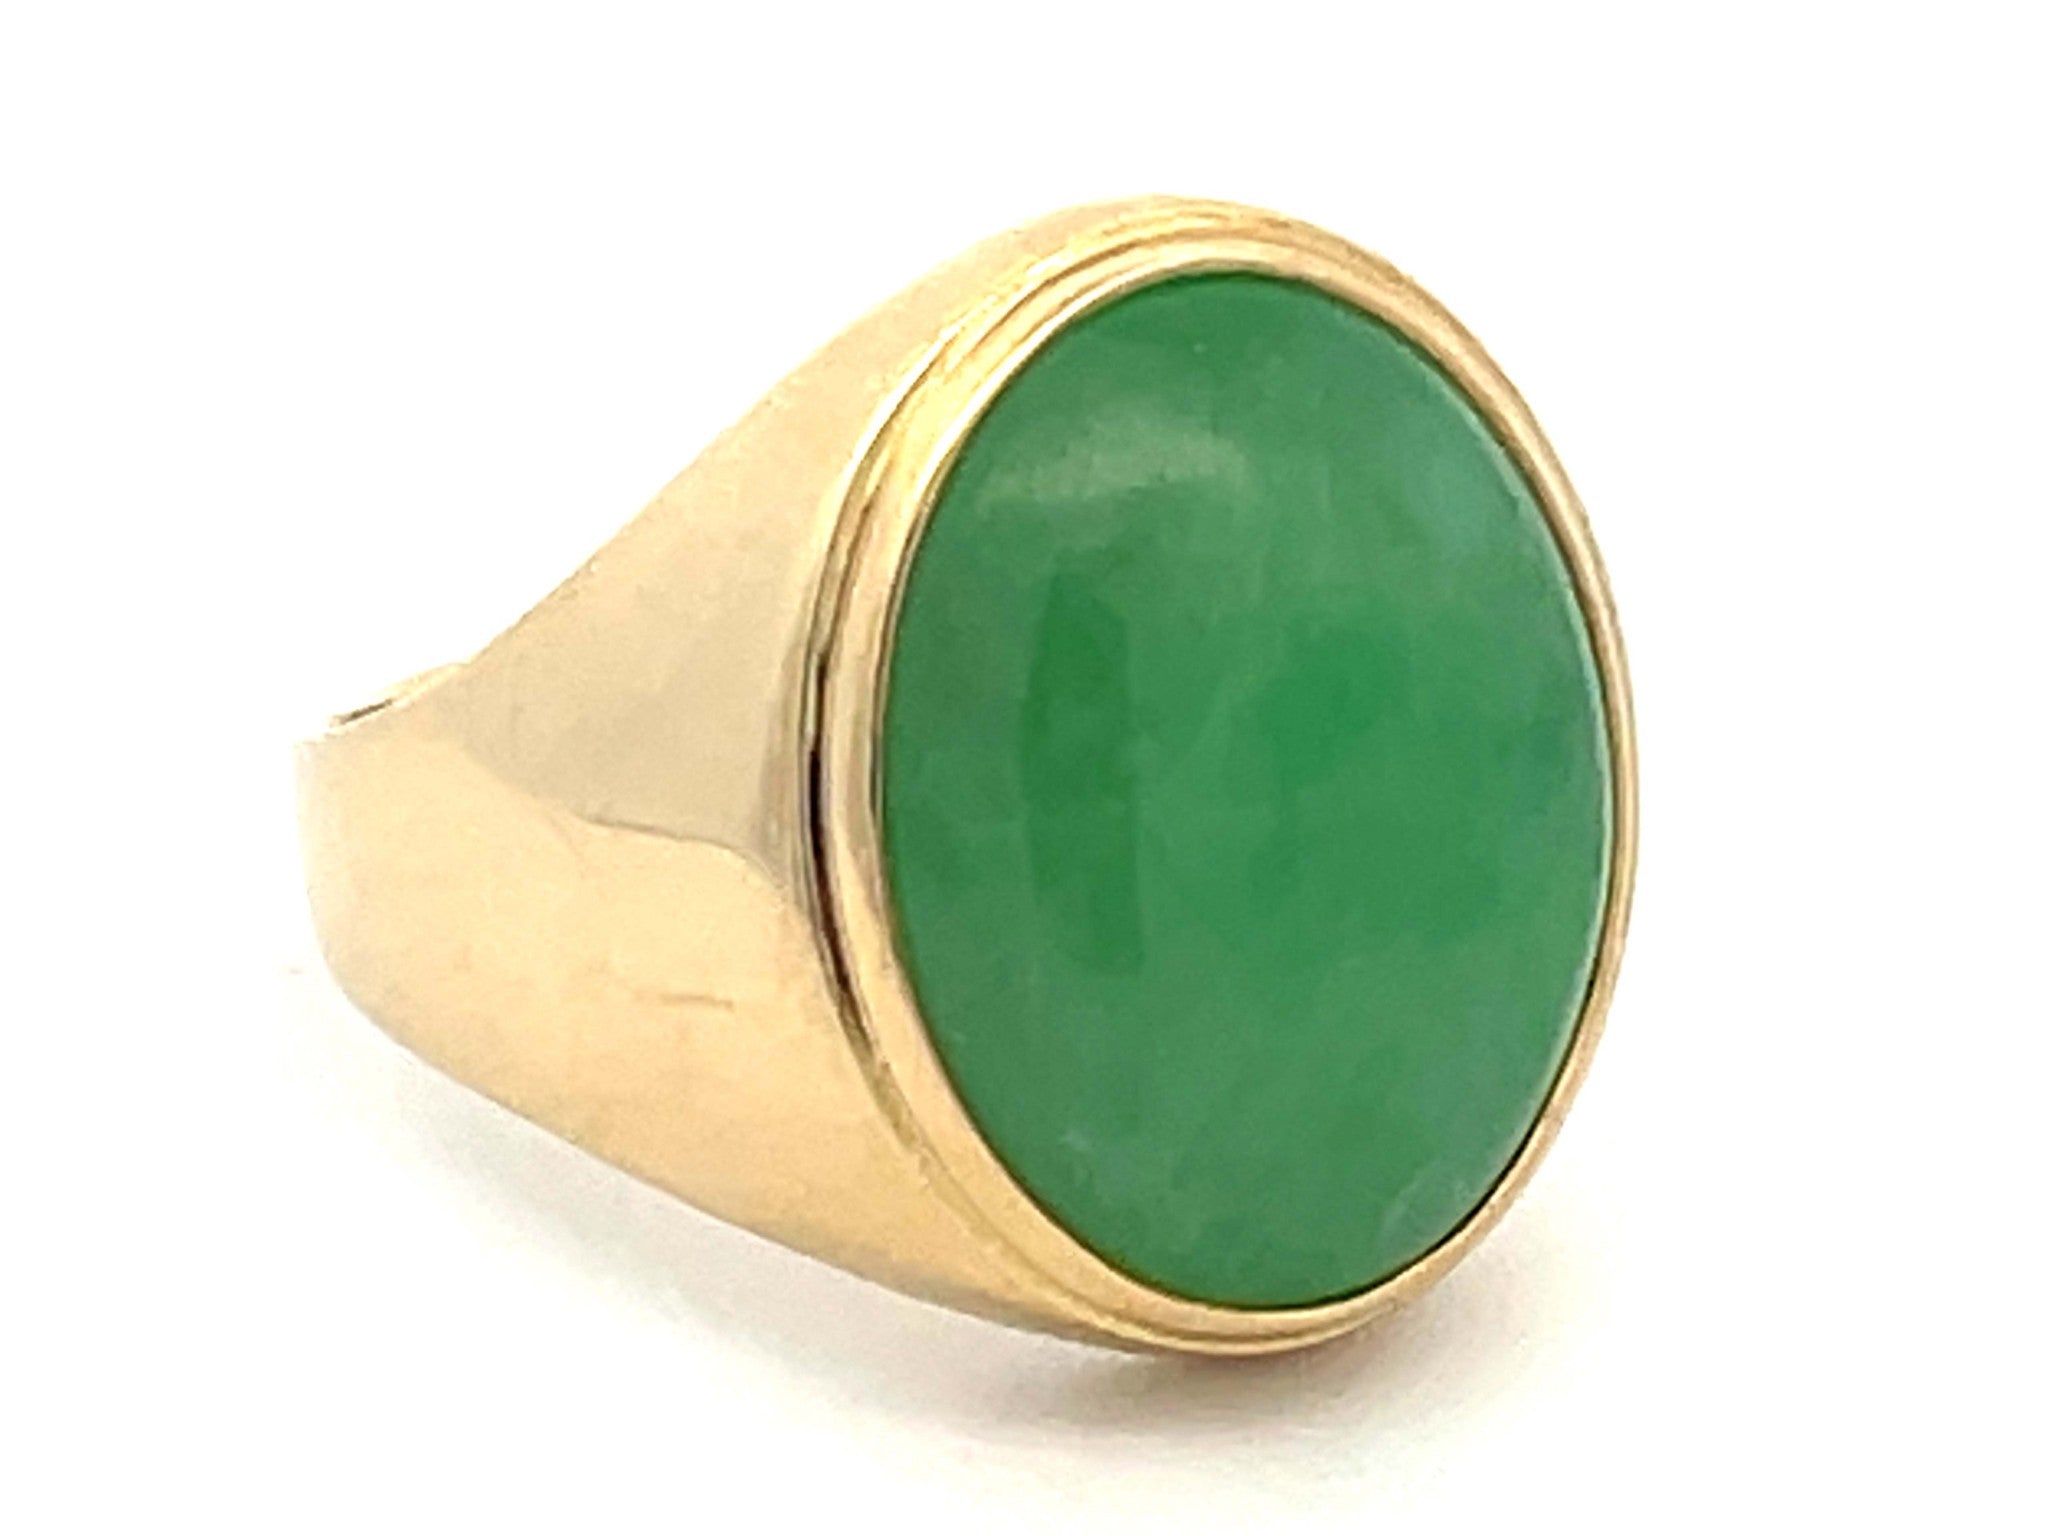 Oval Cabochon Green Jade Ring in 14K Yellow Gold